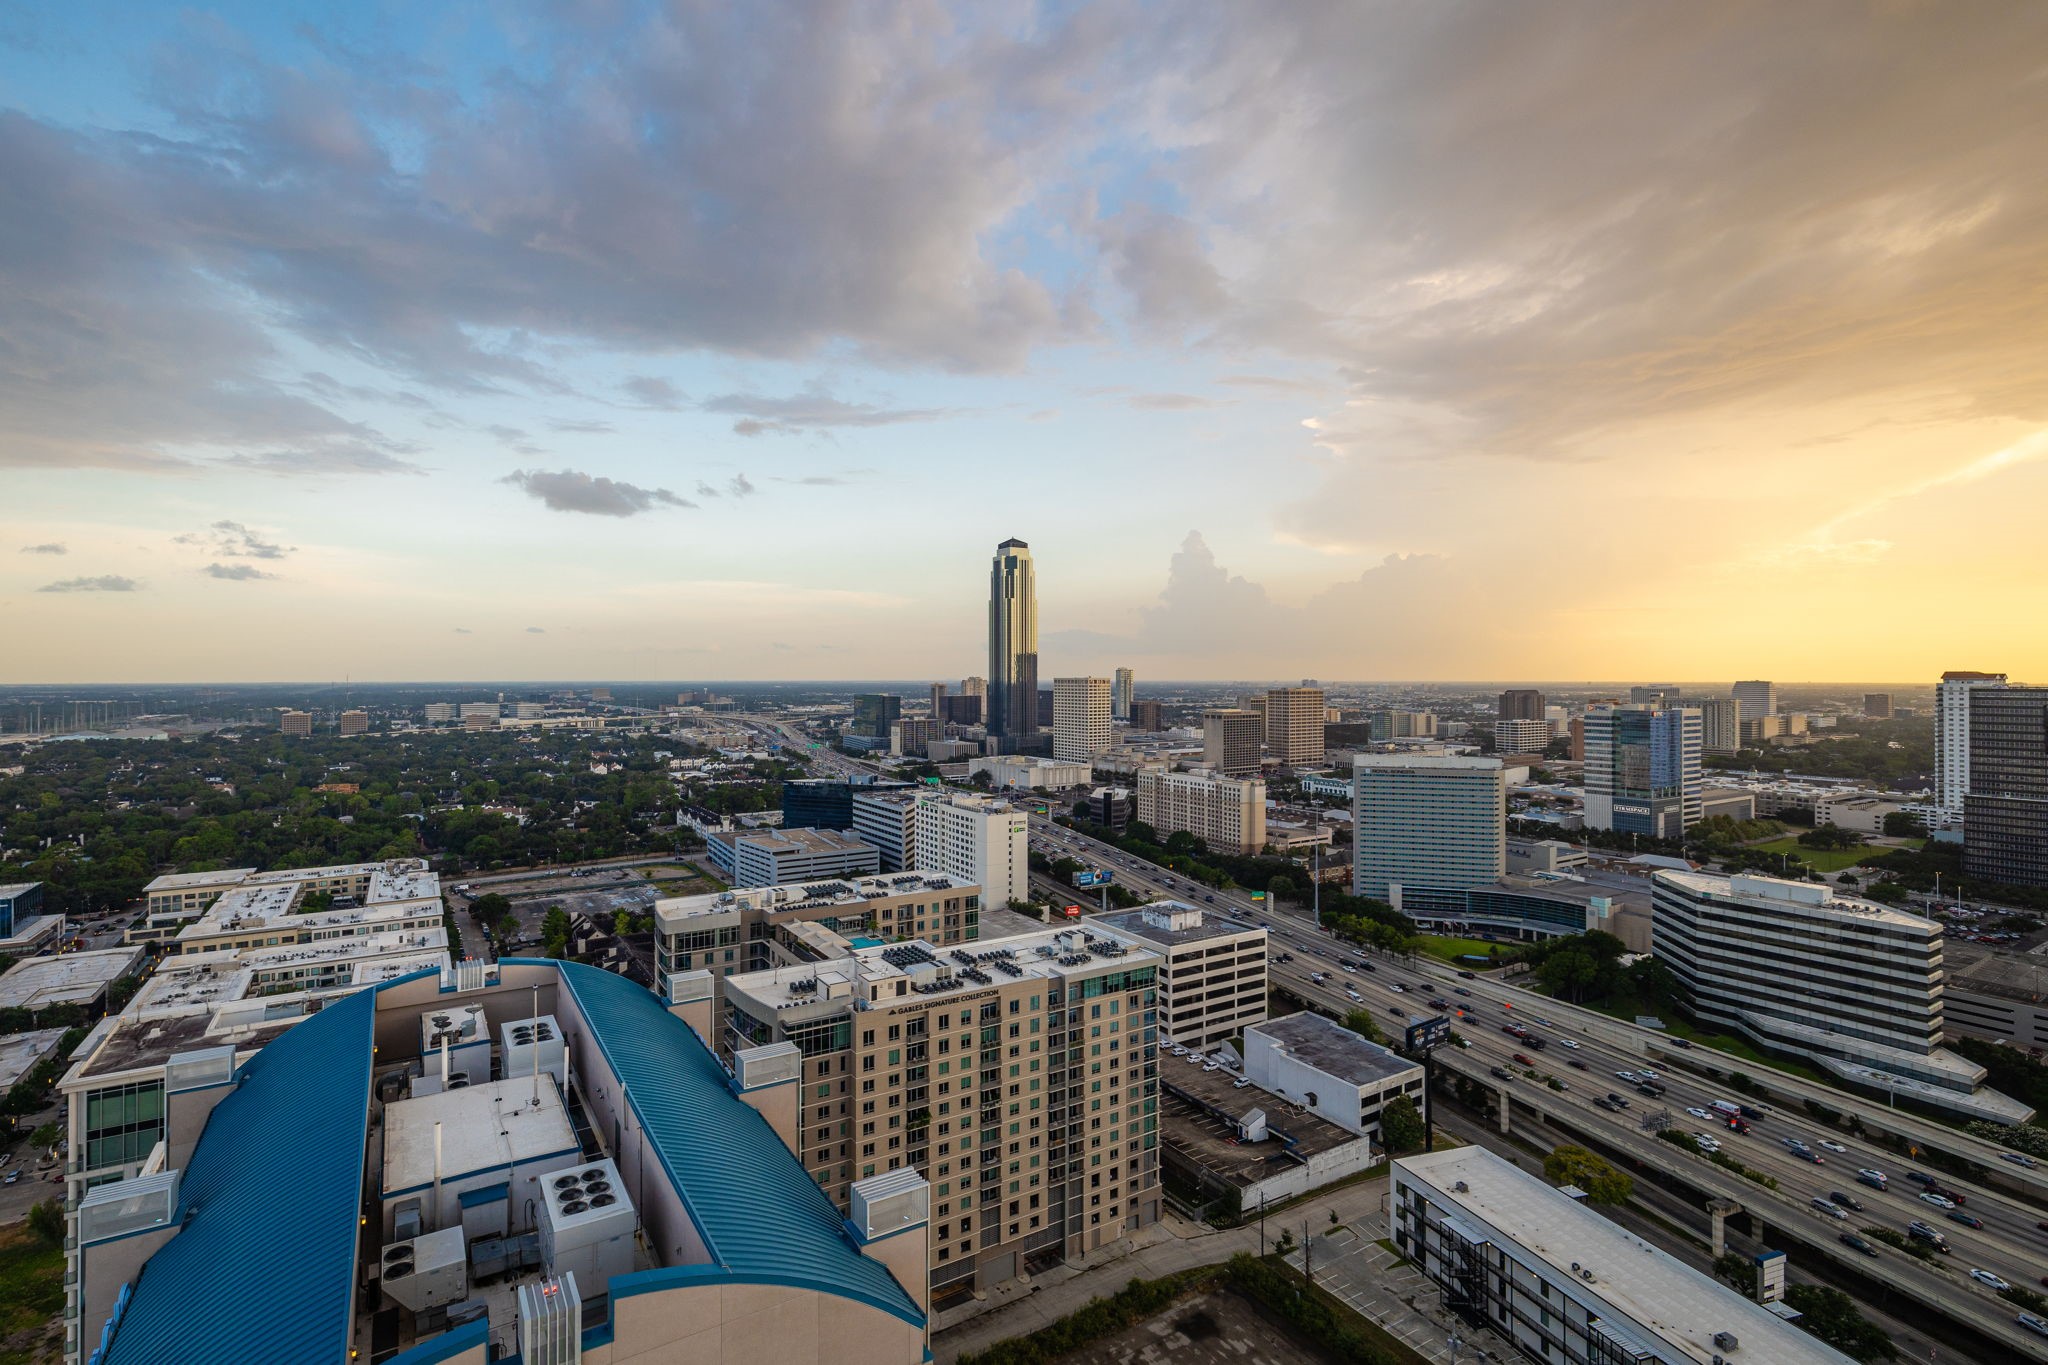 Houston views offer a constant reminder of the city's spirit of progress, innovation, and opportunity.